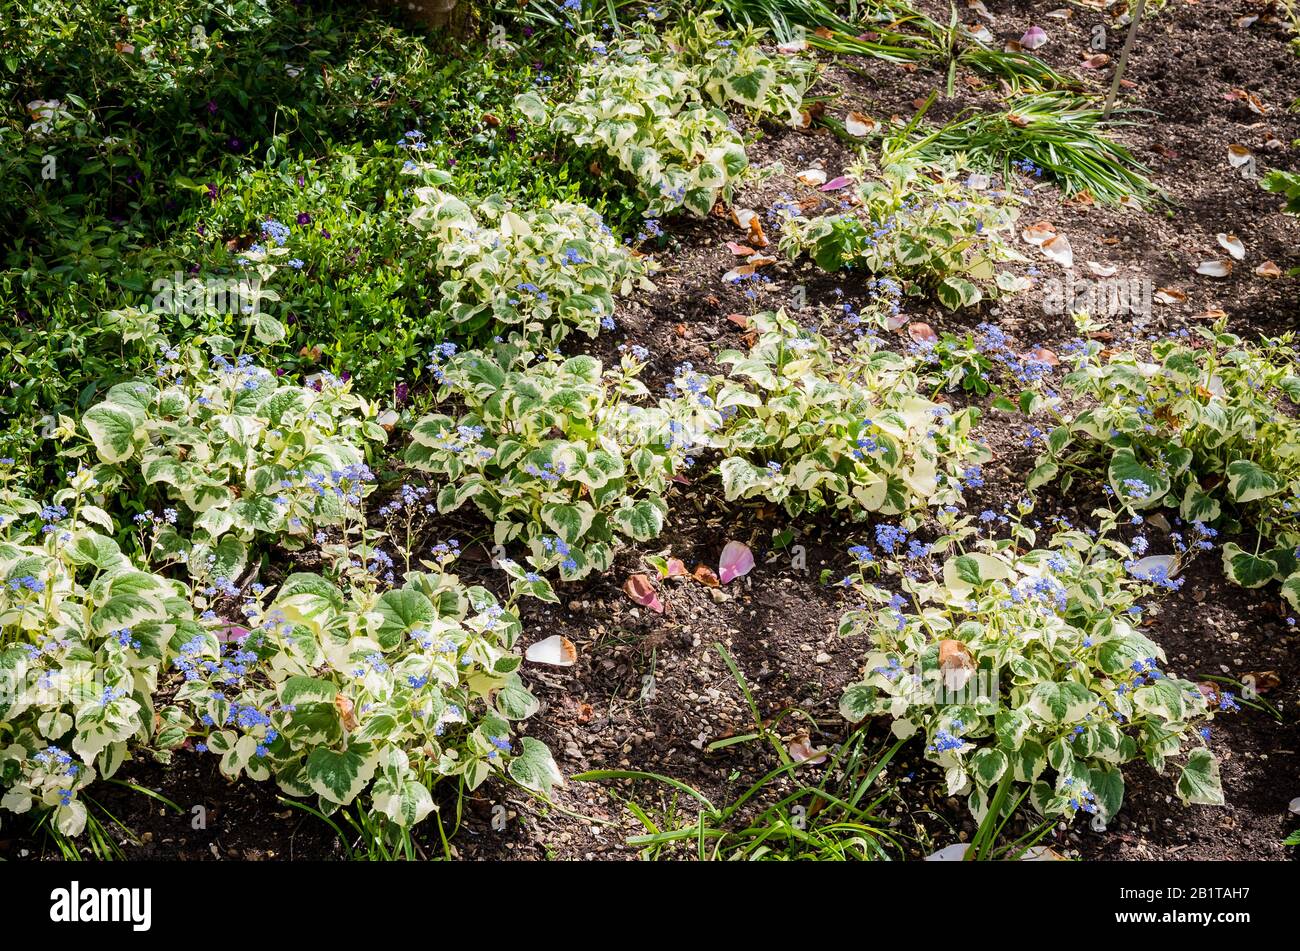 A bed of Siberian Bugloss showing variegated leaves and forget-me-not blue flowers in an English garden Stock Photo